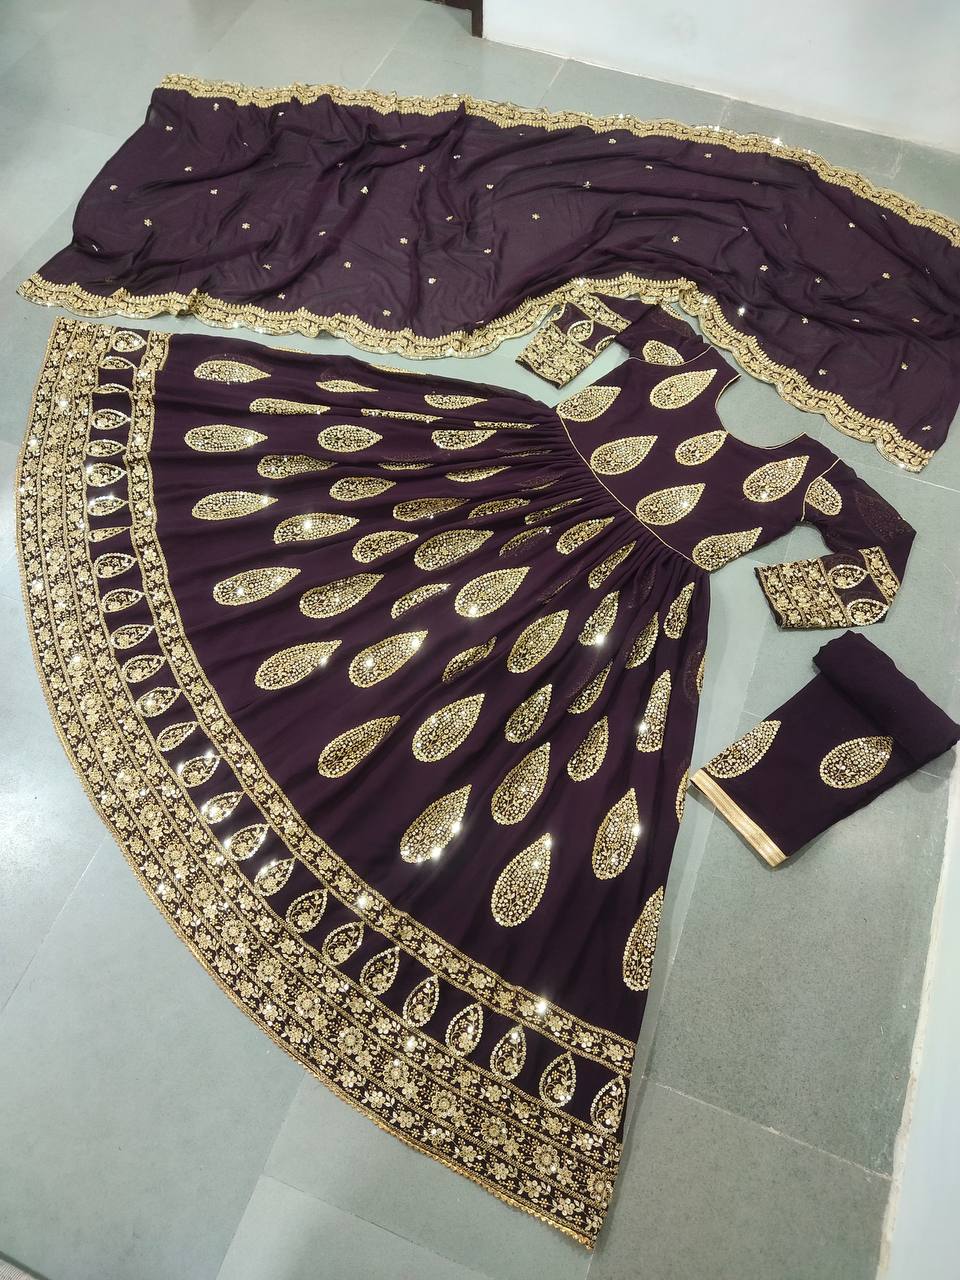 Begni Salwar Suit In Faux Georgette With 5 MM Sequence Work